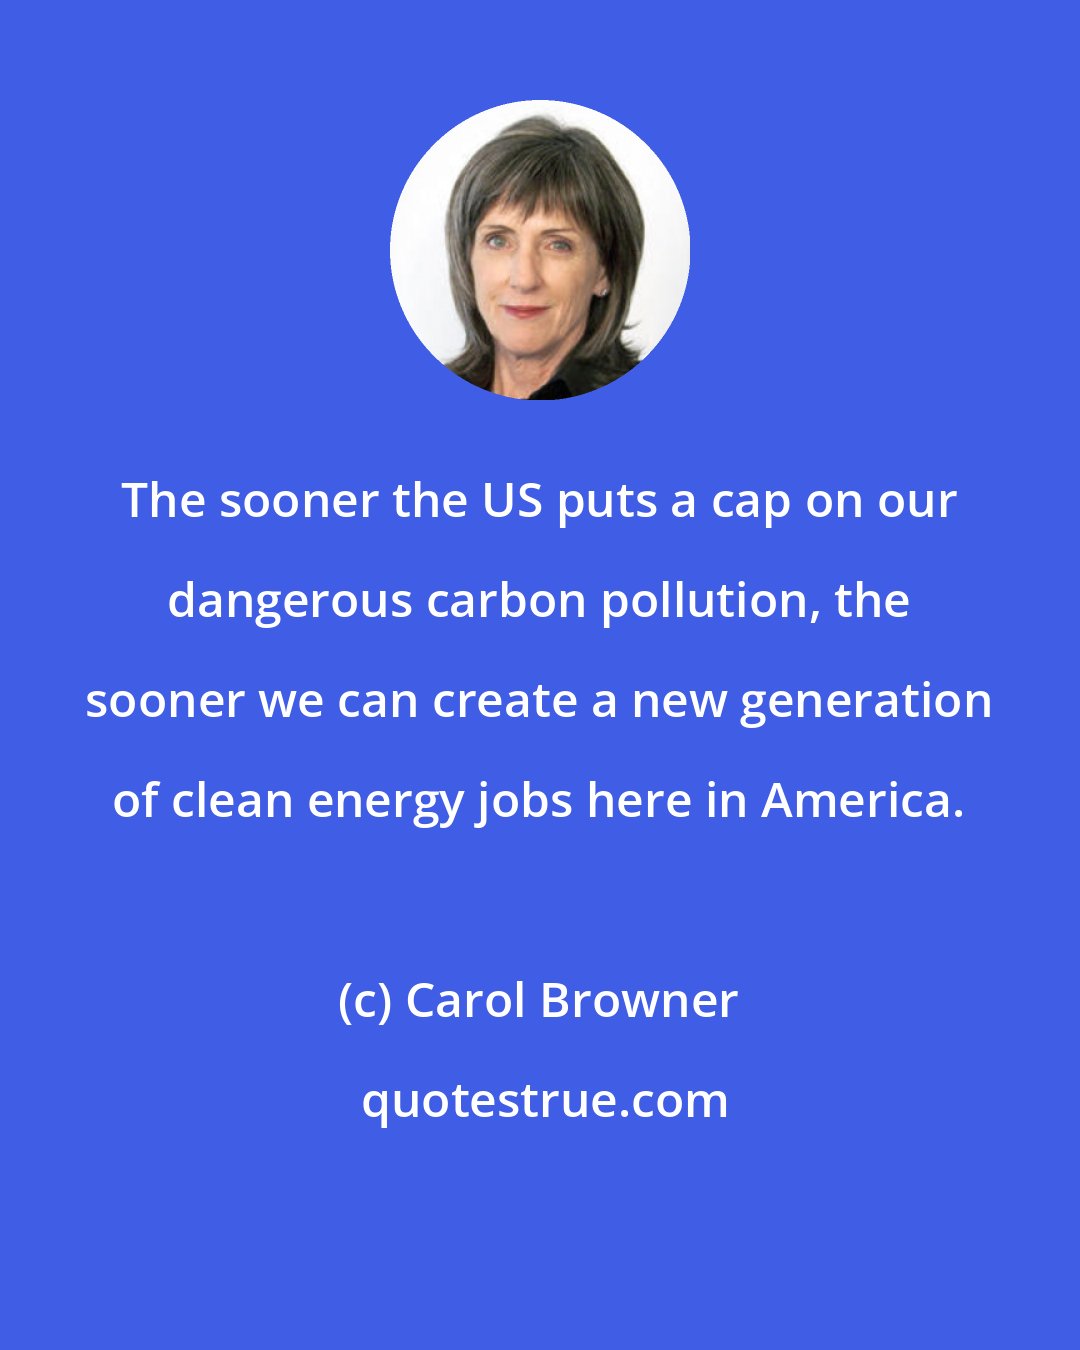 Carol Browner: The sooner the US puts a cap on our dangerous carbon pollution, the sooner we can create a new generation of clean energy jobs here in America.